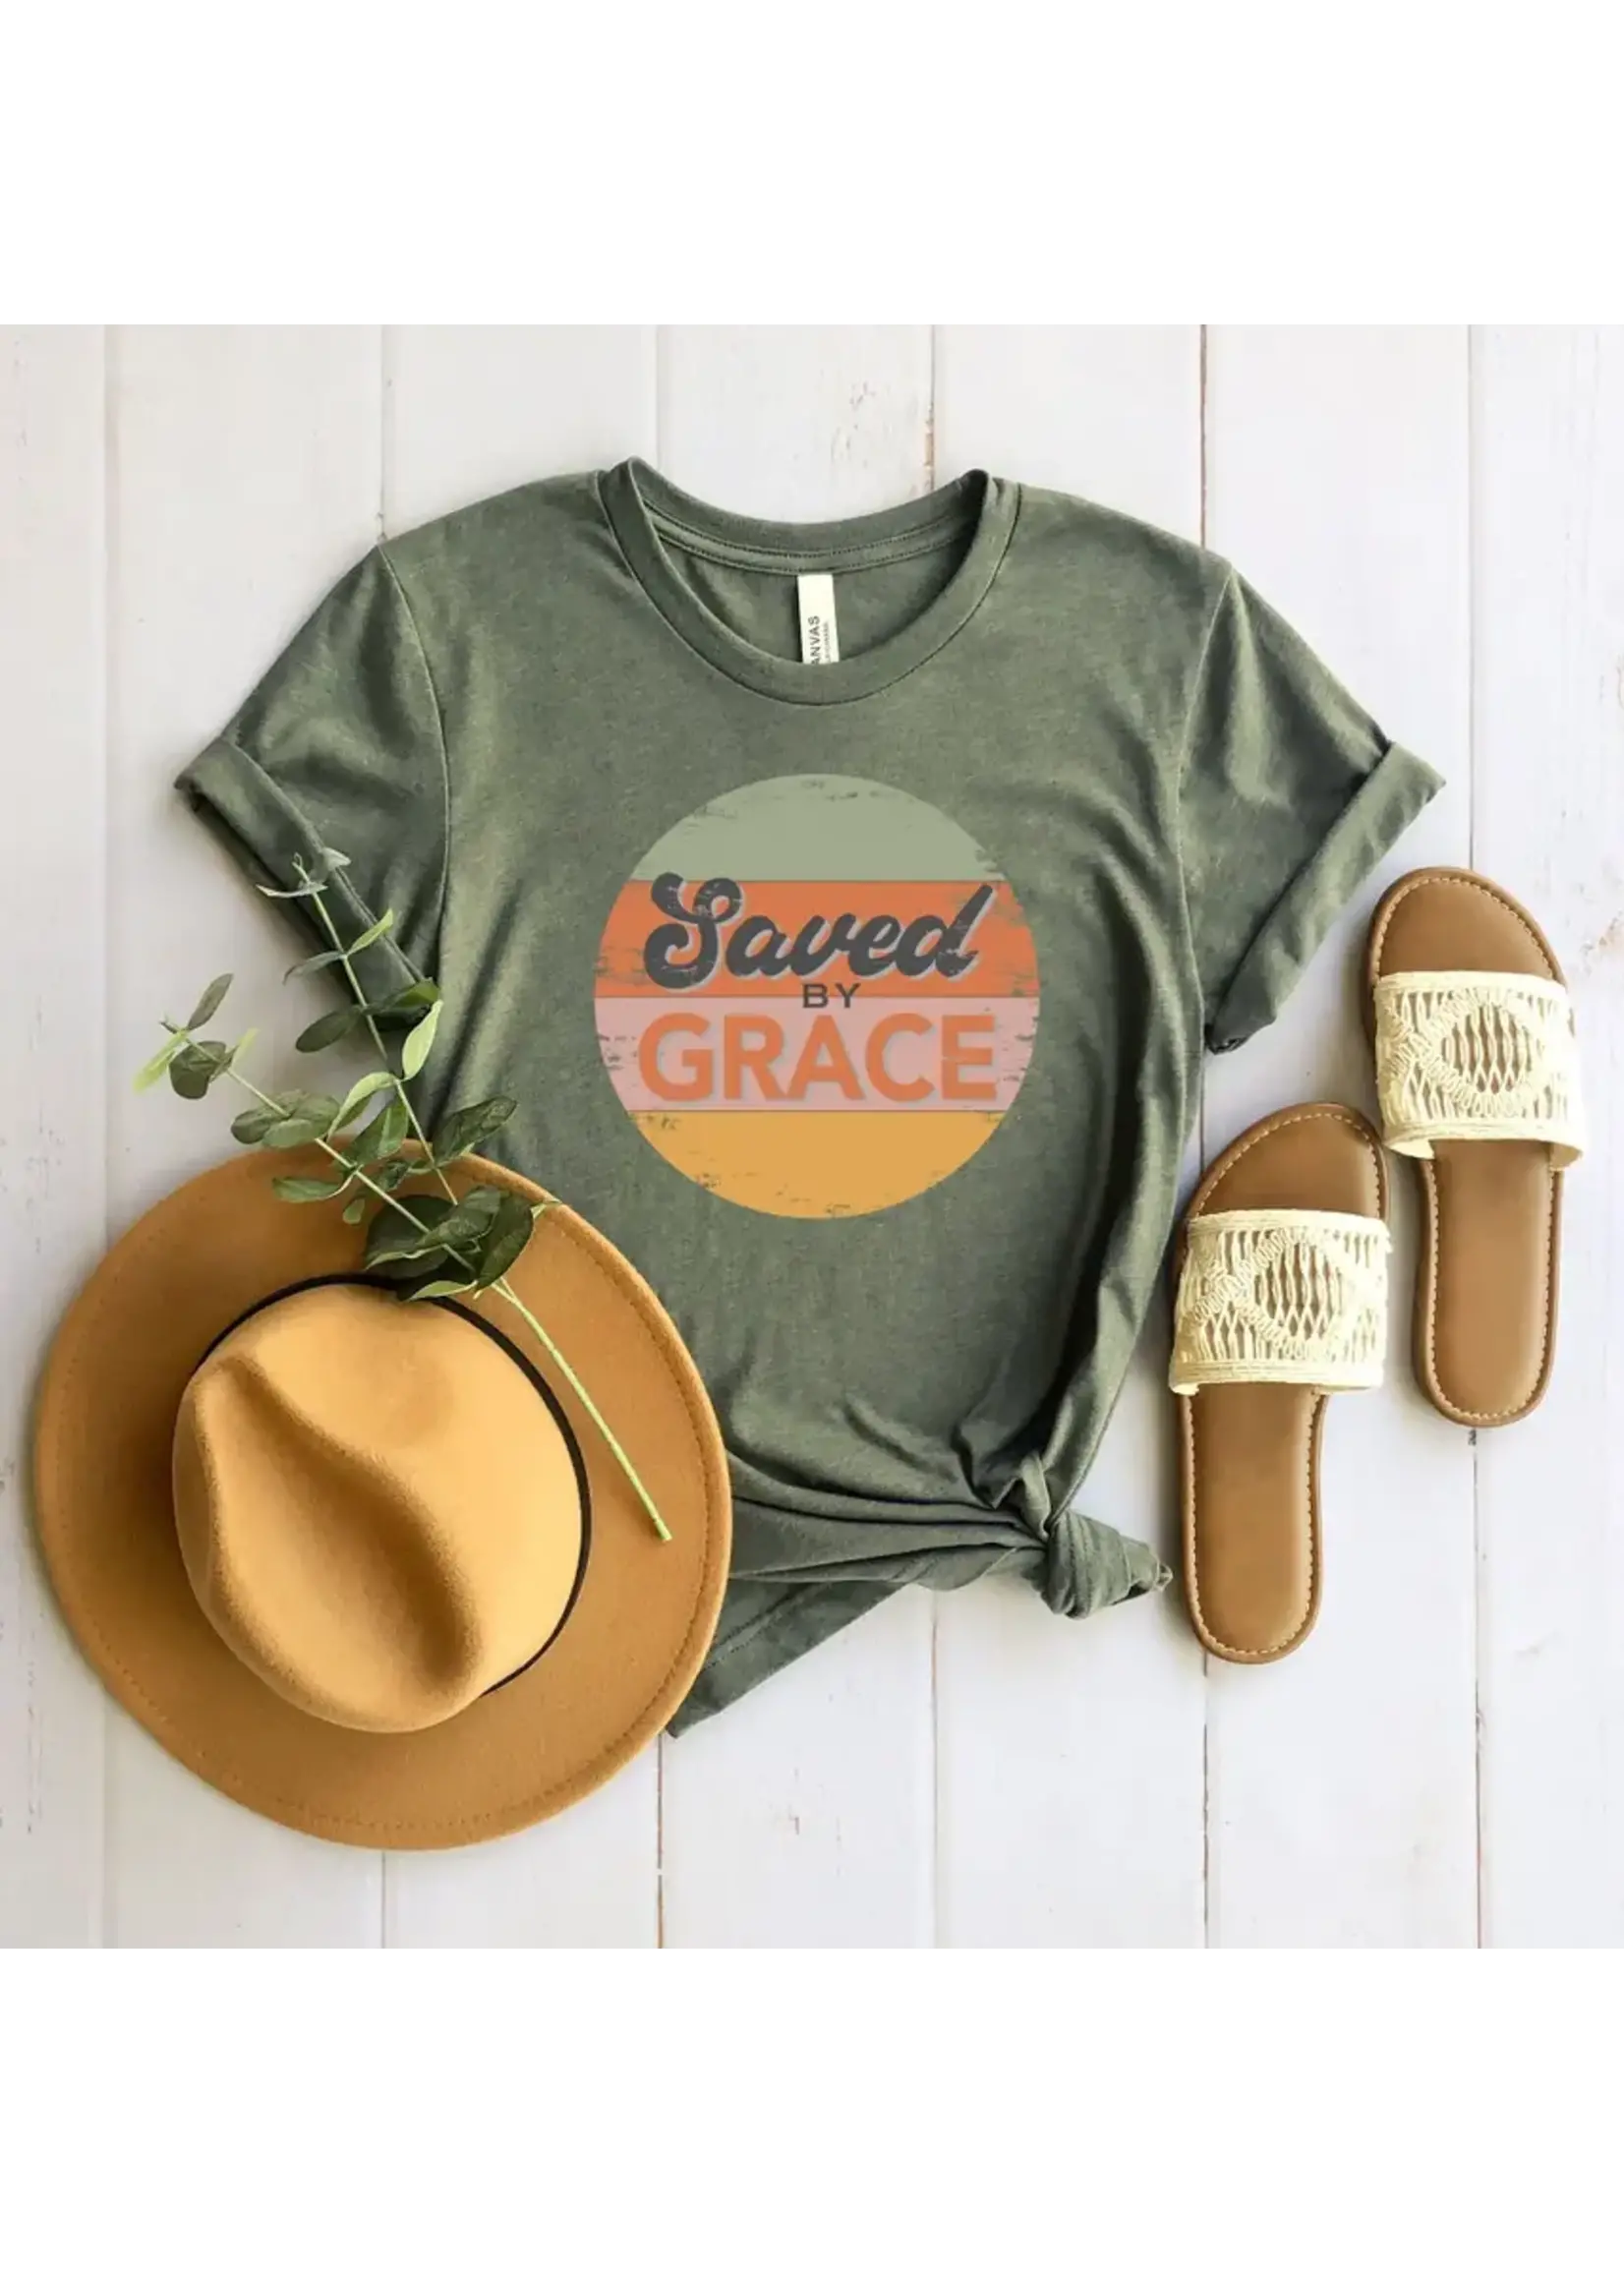 Uplifting Threads Co "Saved by Grace" Retro Tee